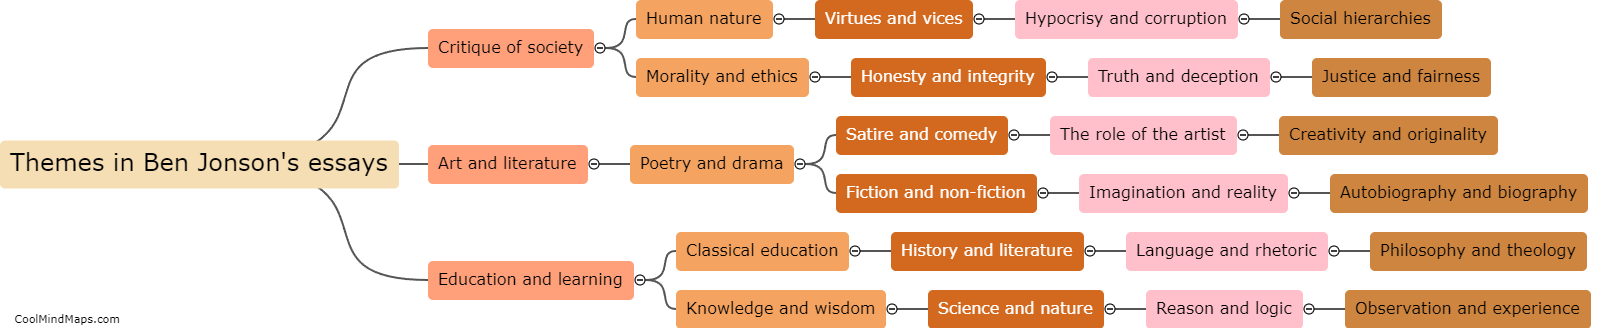 What are the main themes explored in Ben Jonson's essays?